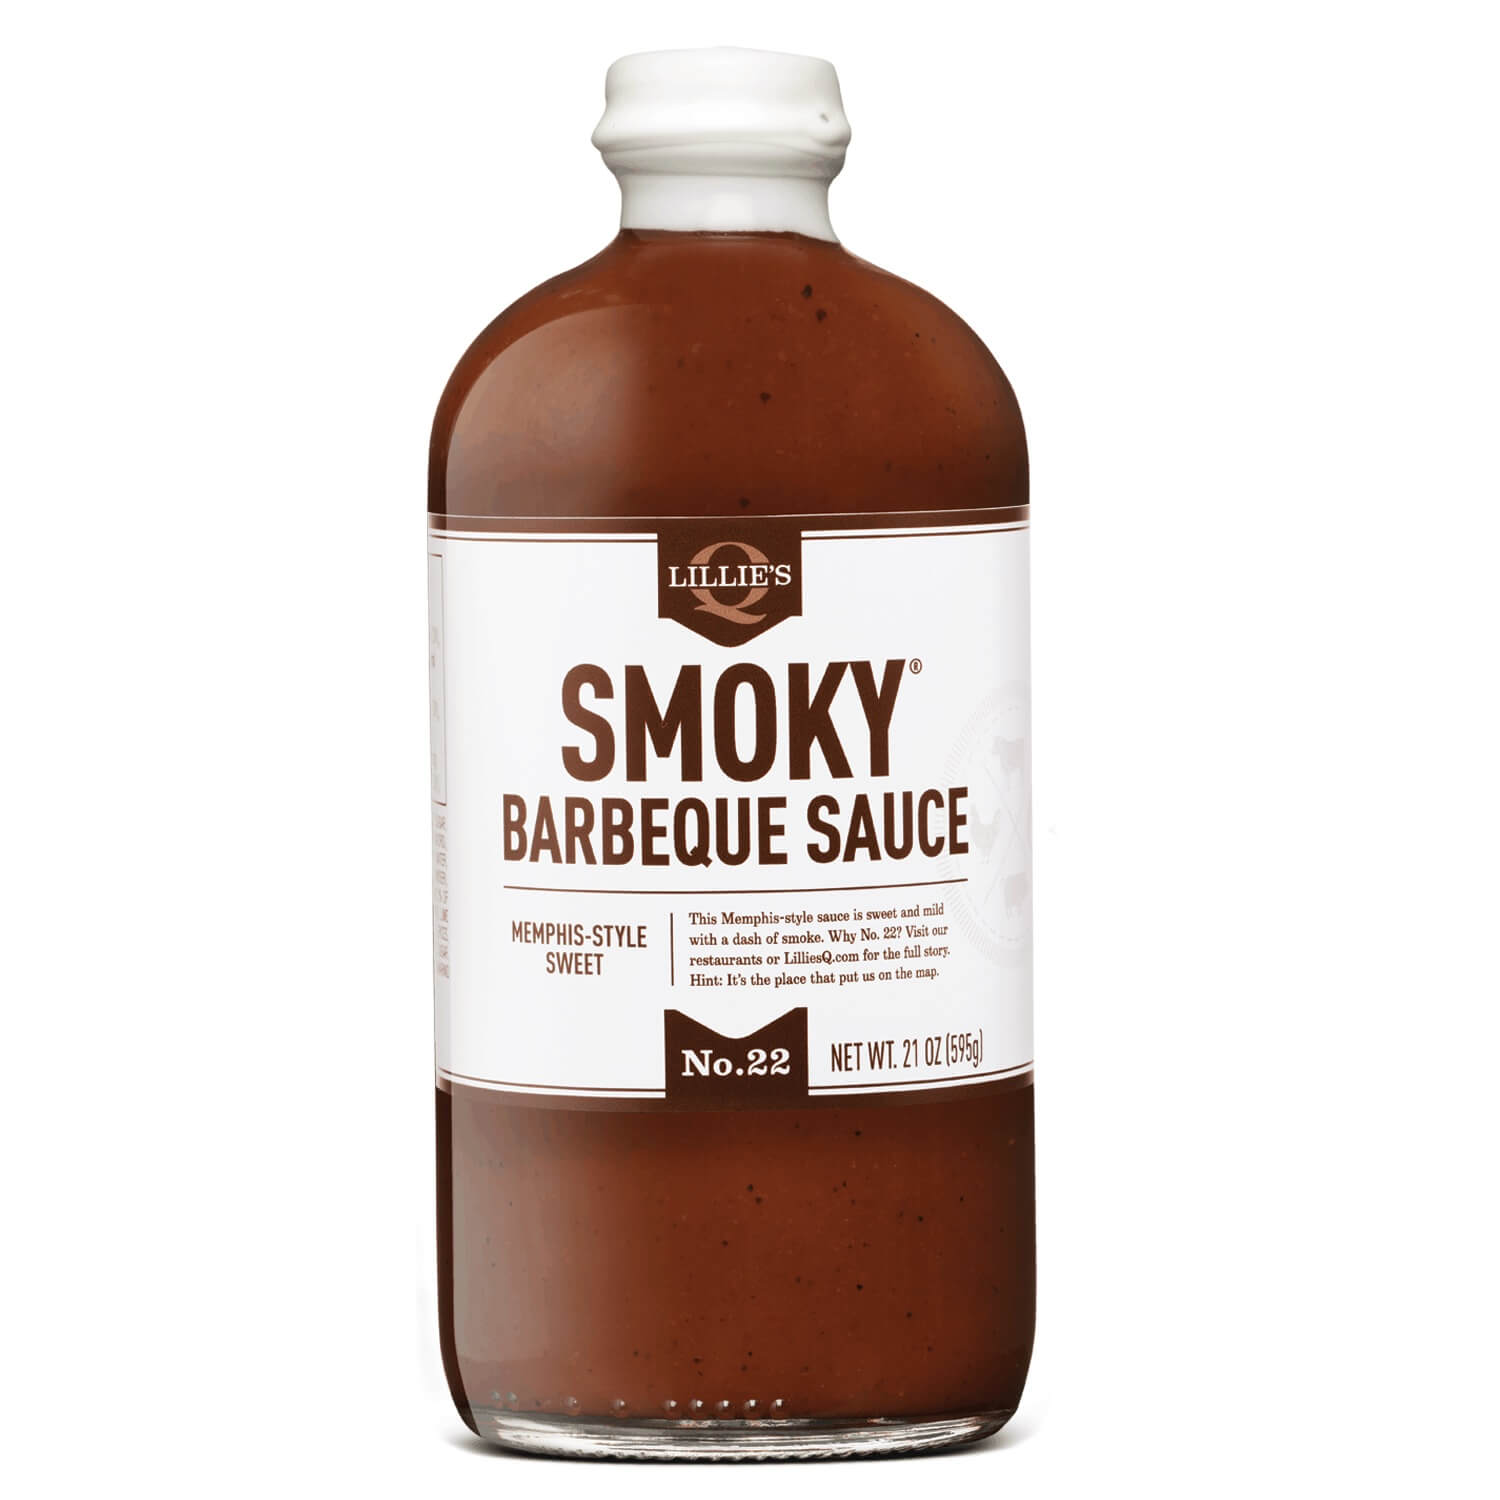 Lillies Smoky Barbeque Sauce 595g